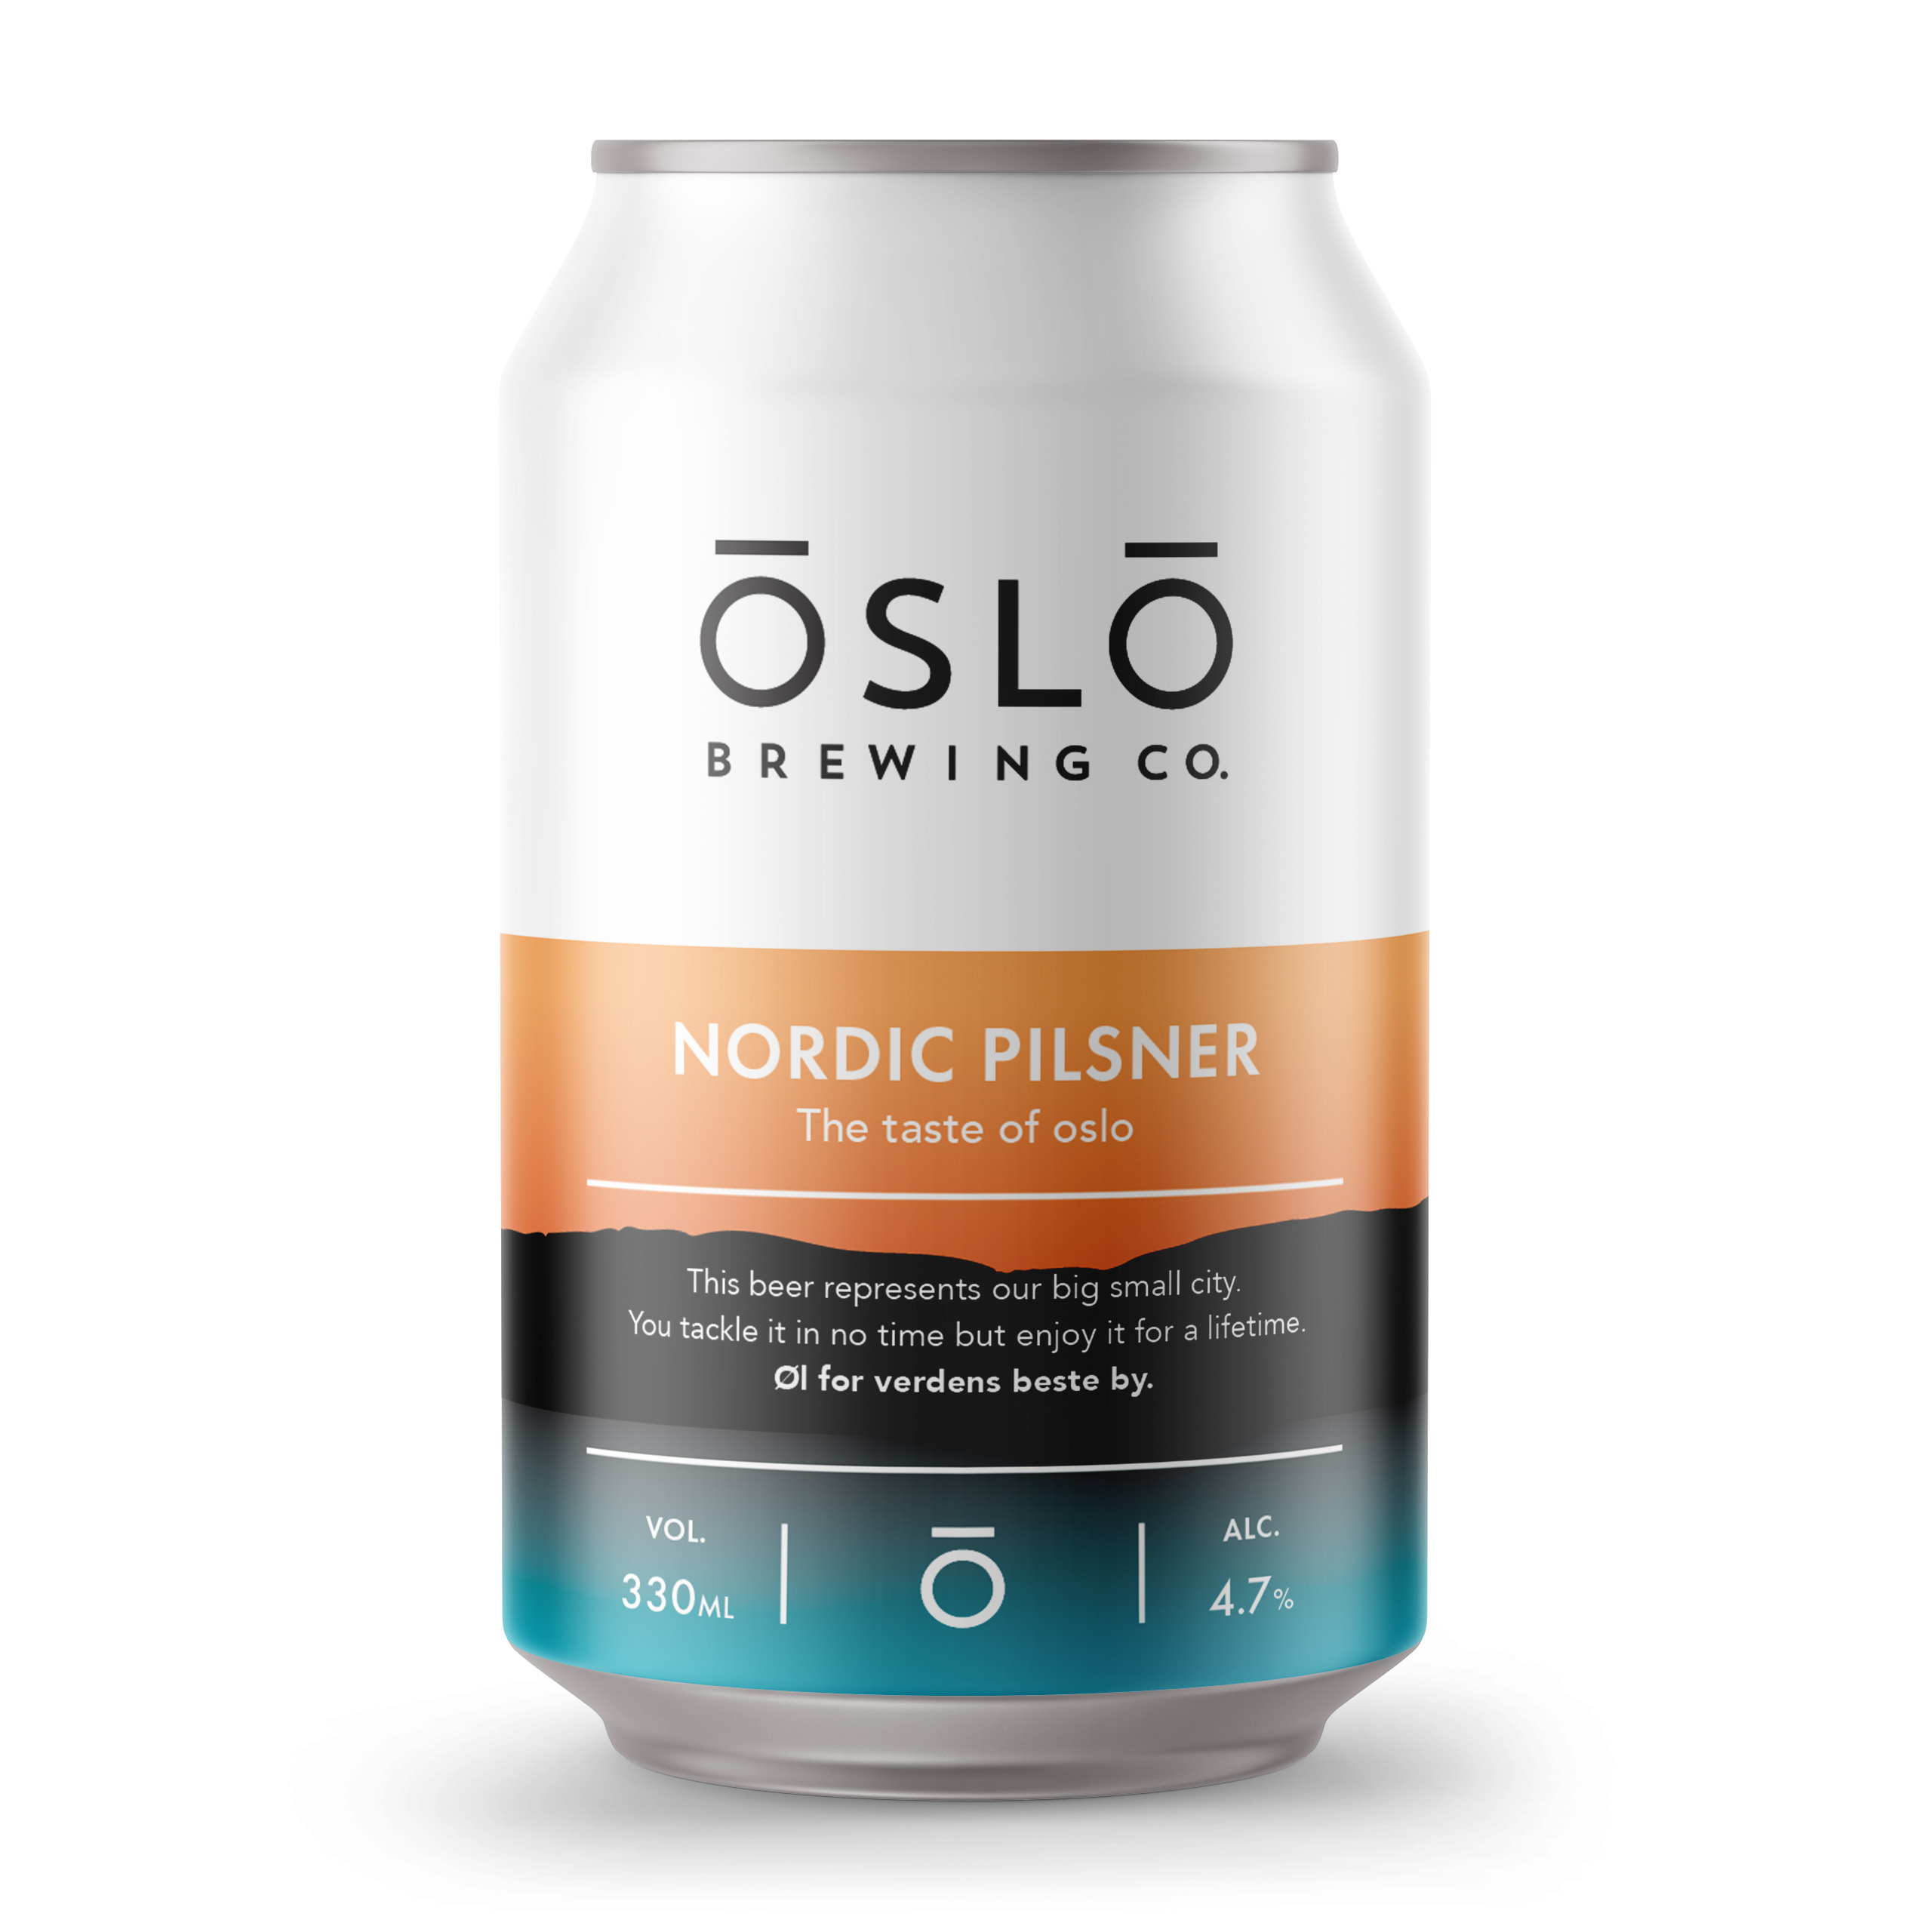 Oslo_Brewing_Company_Nordic_Pilsner_Beer_Can